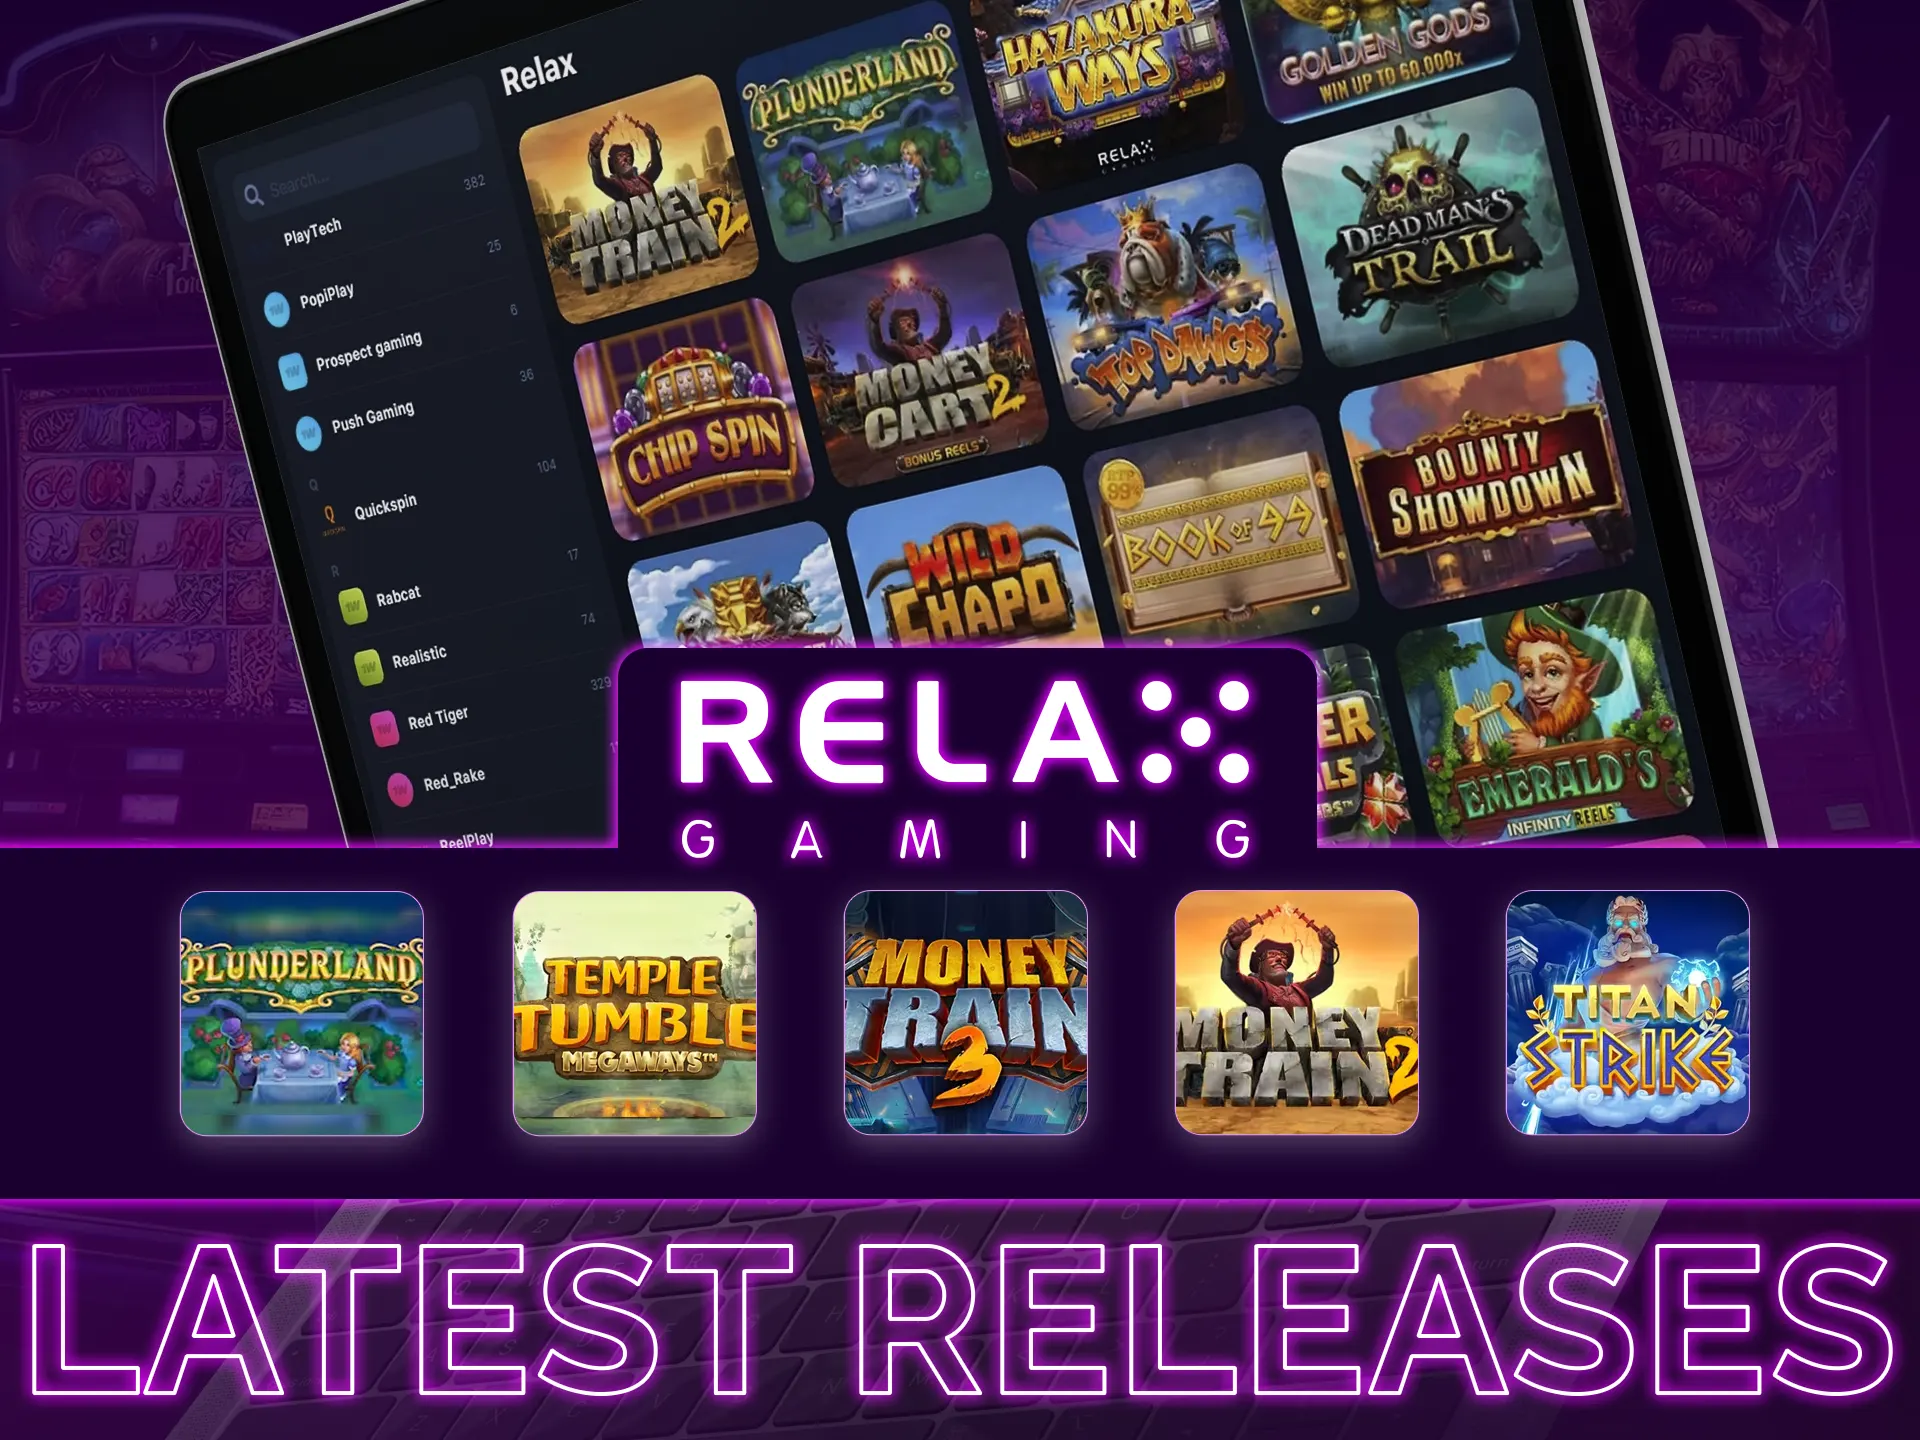 Meet the latest releases from Relax Gaming provider.